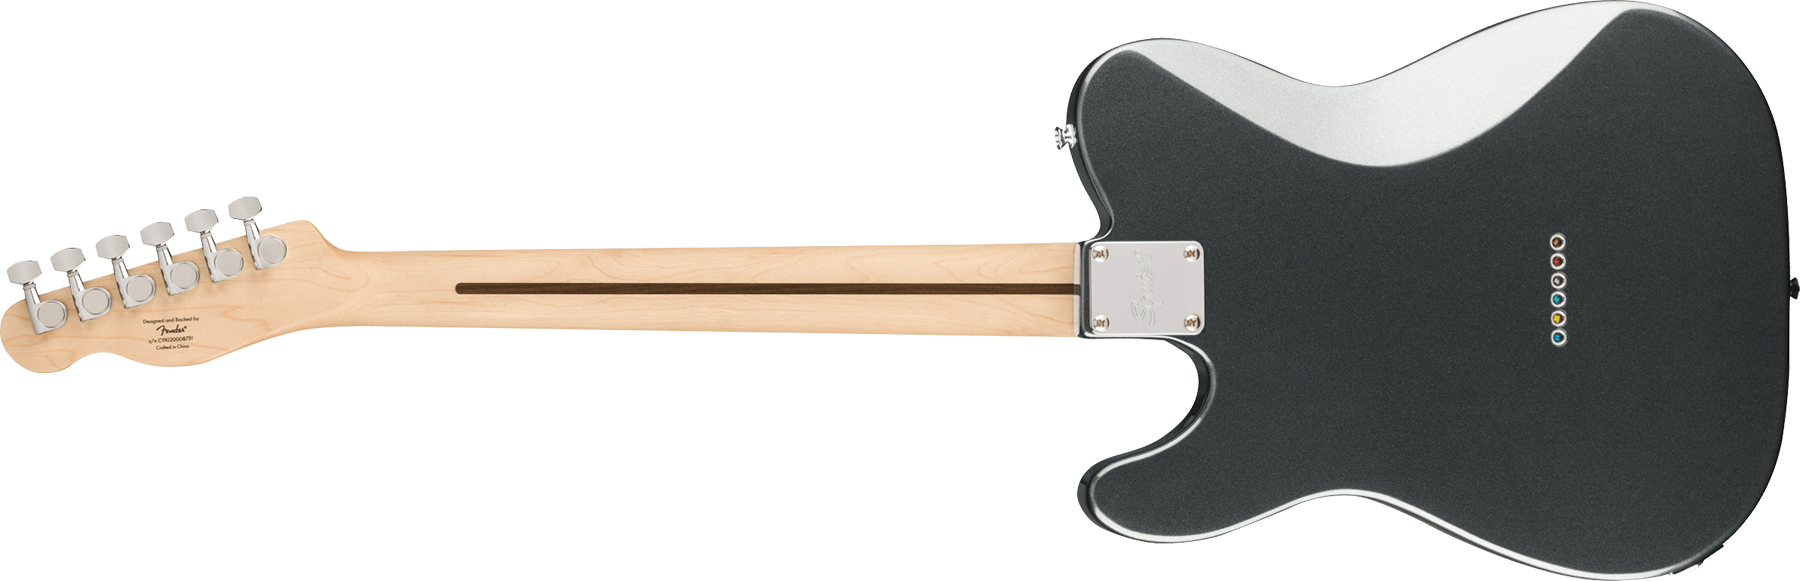 Squier Tele Affinity Deluxe 2021 Hh Ht Lau - Charcoal Frost Metallic - Tel shape electric guitar - Variation 1